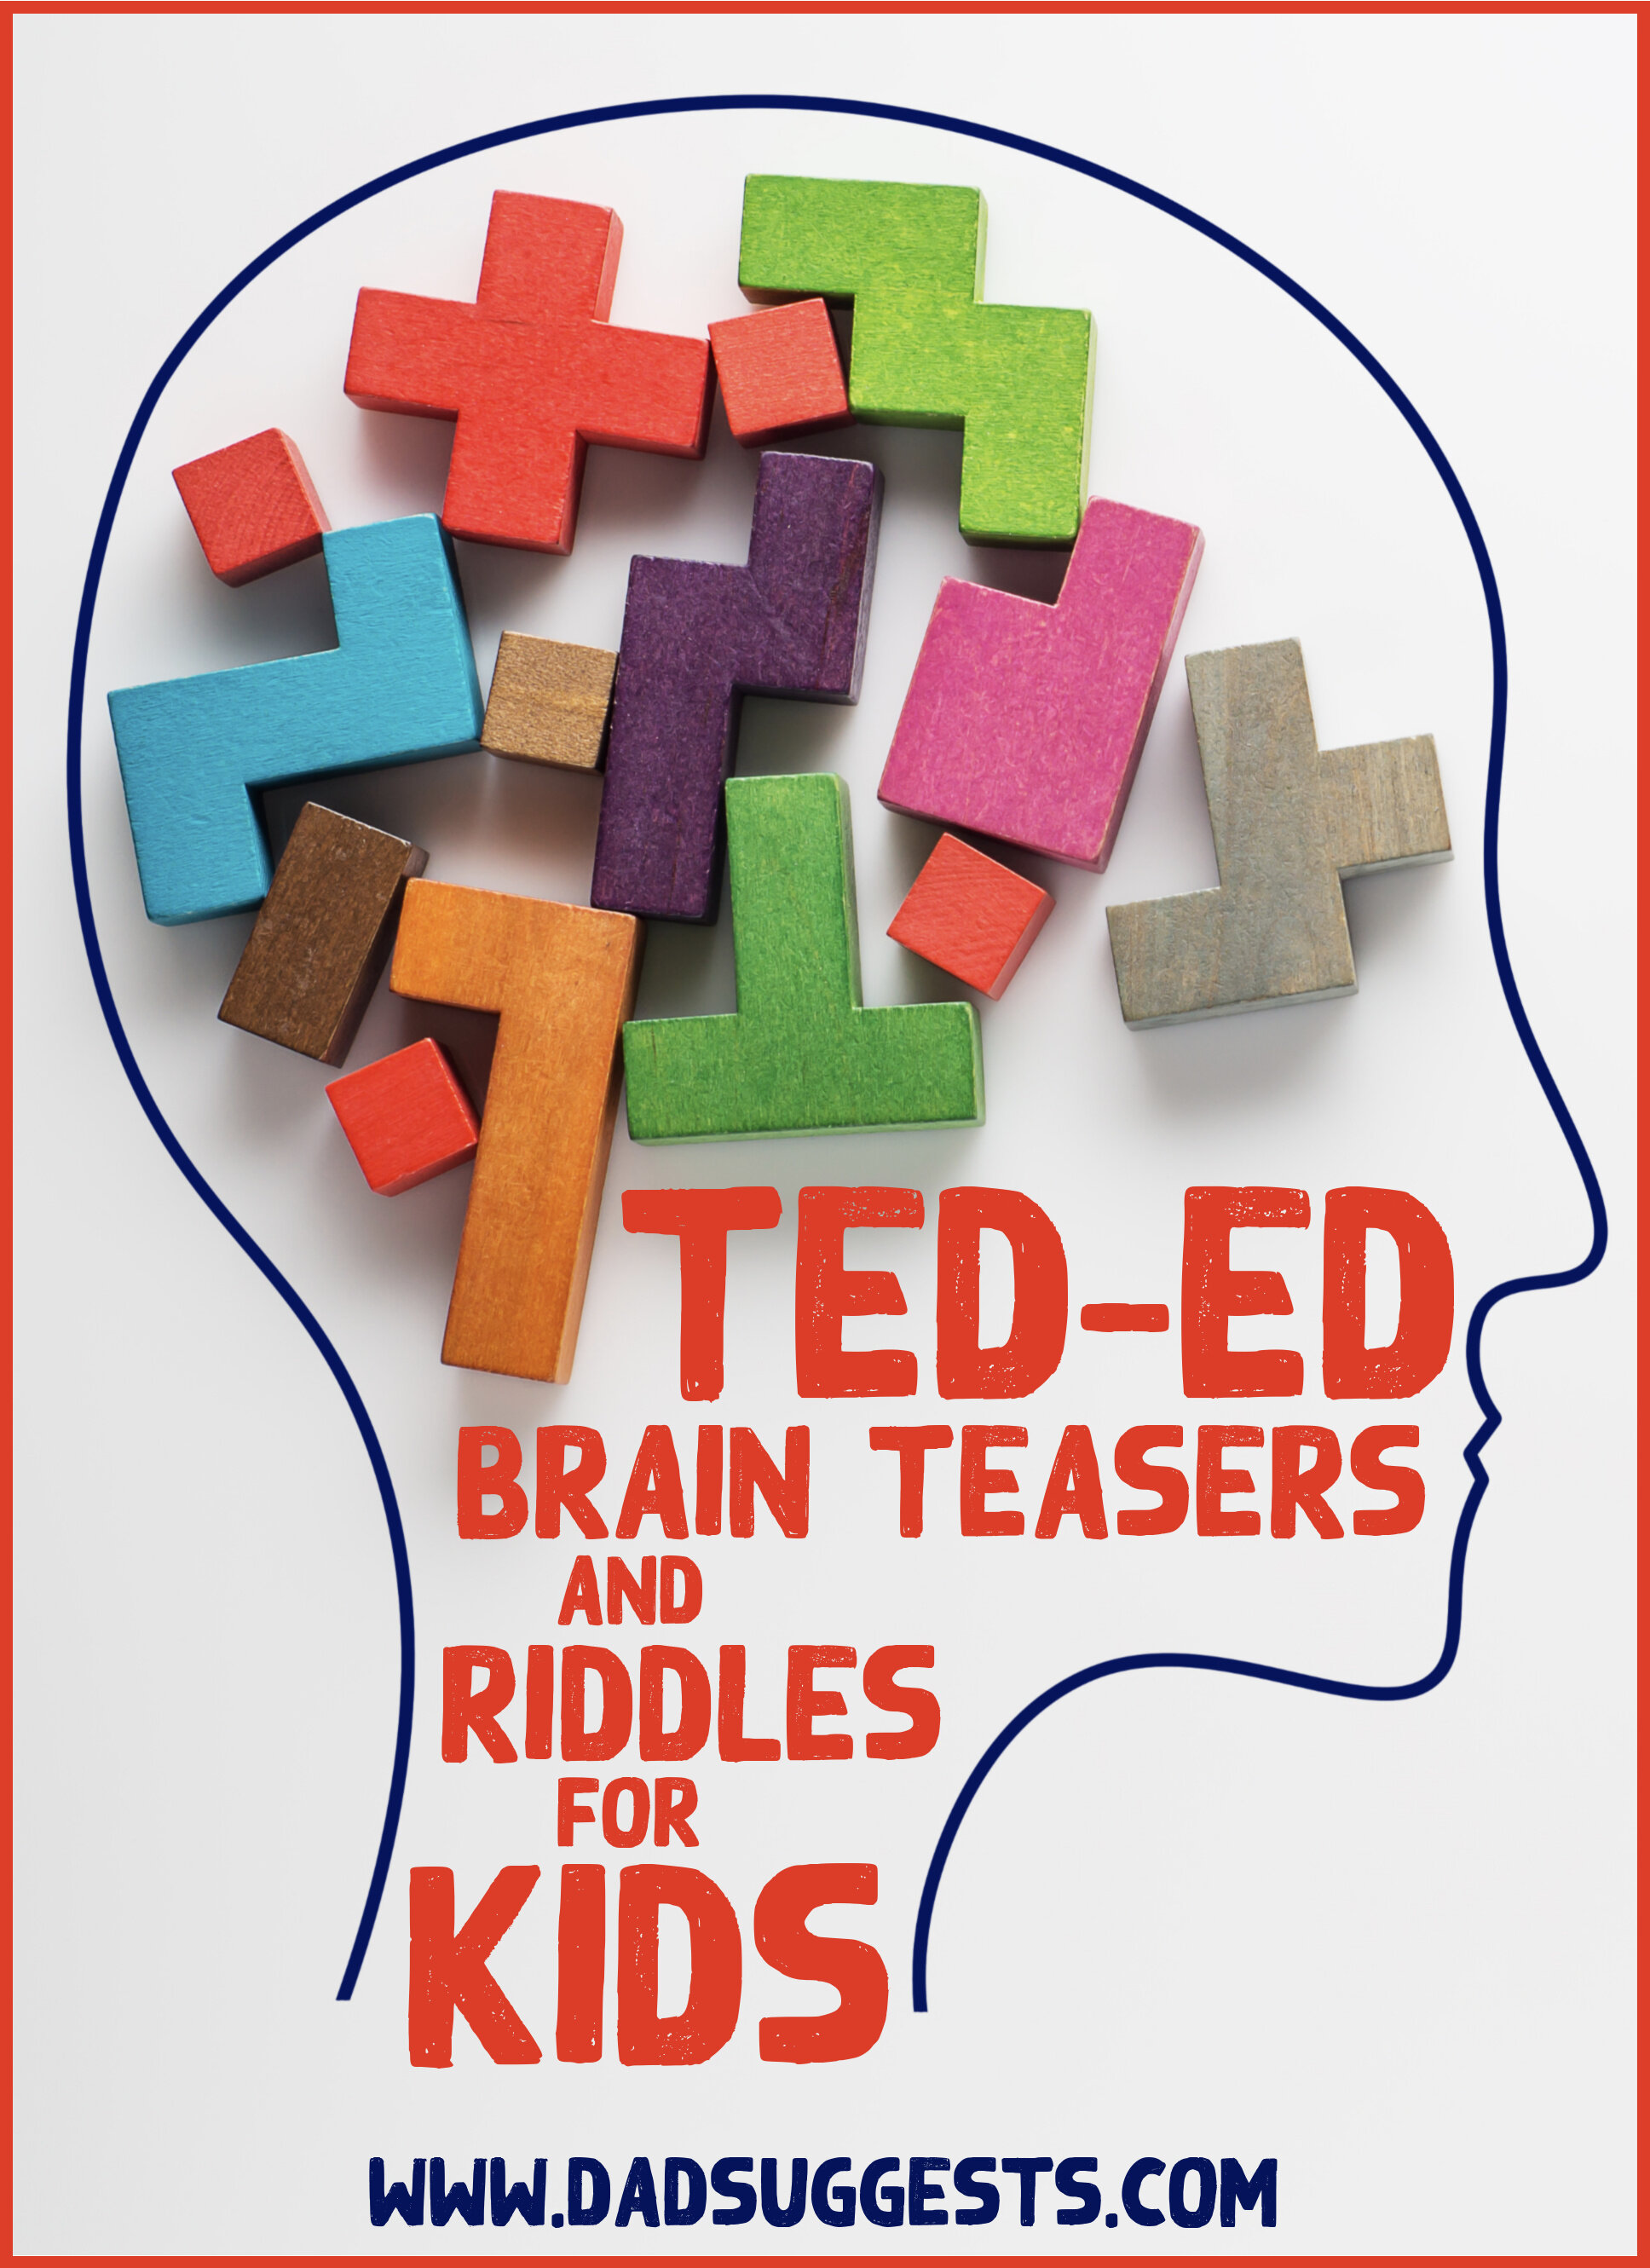 Our Favorite Mind-Bending TED-Ed Riddles for Kids | Dad Suggests